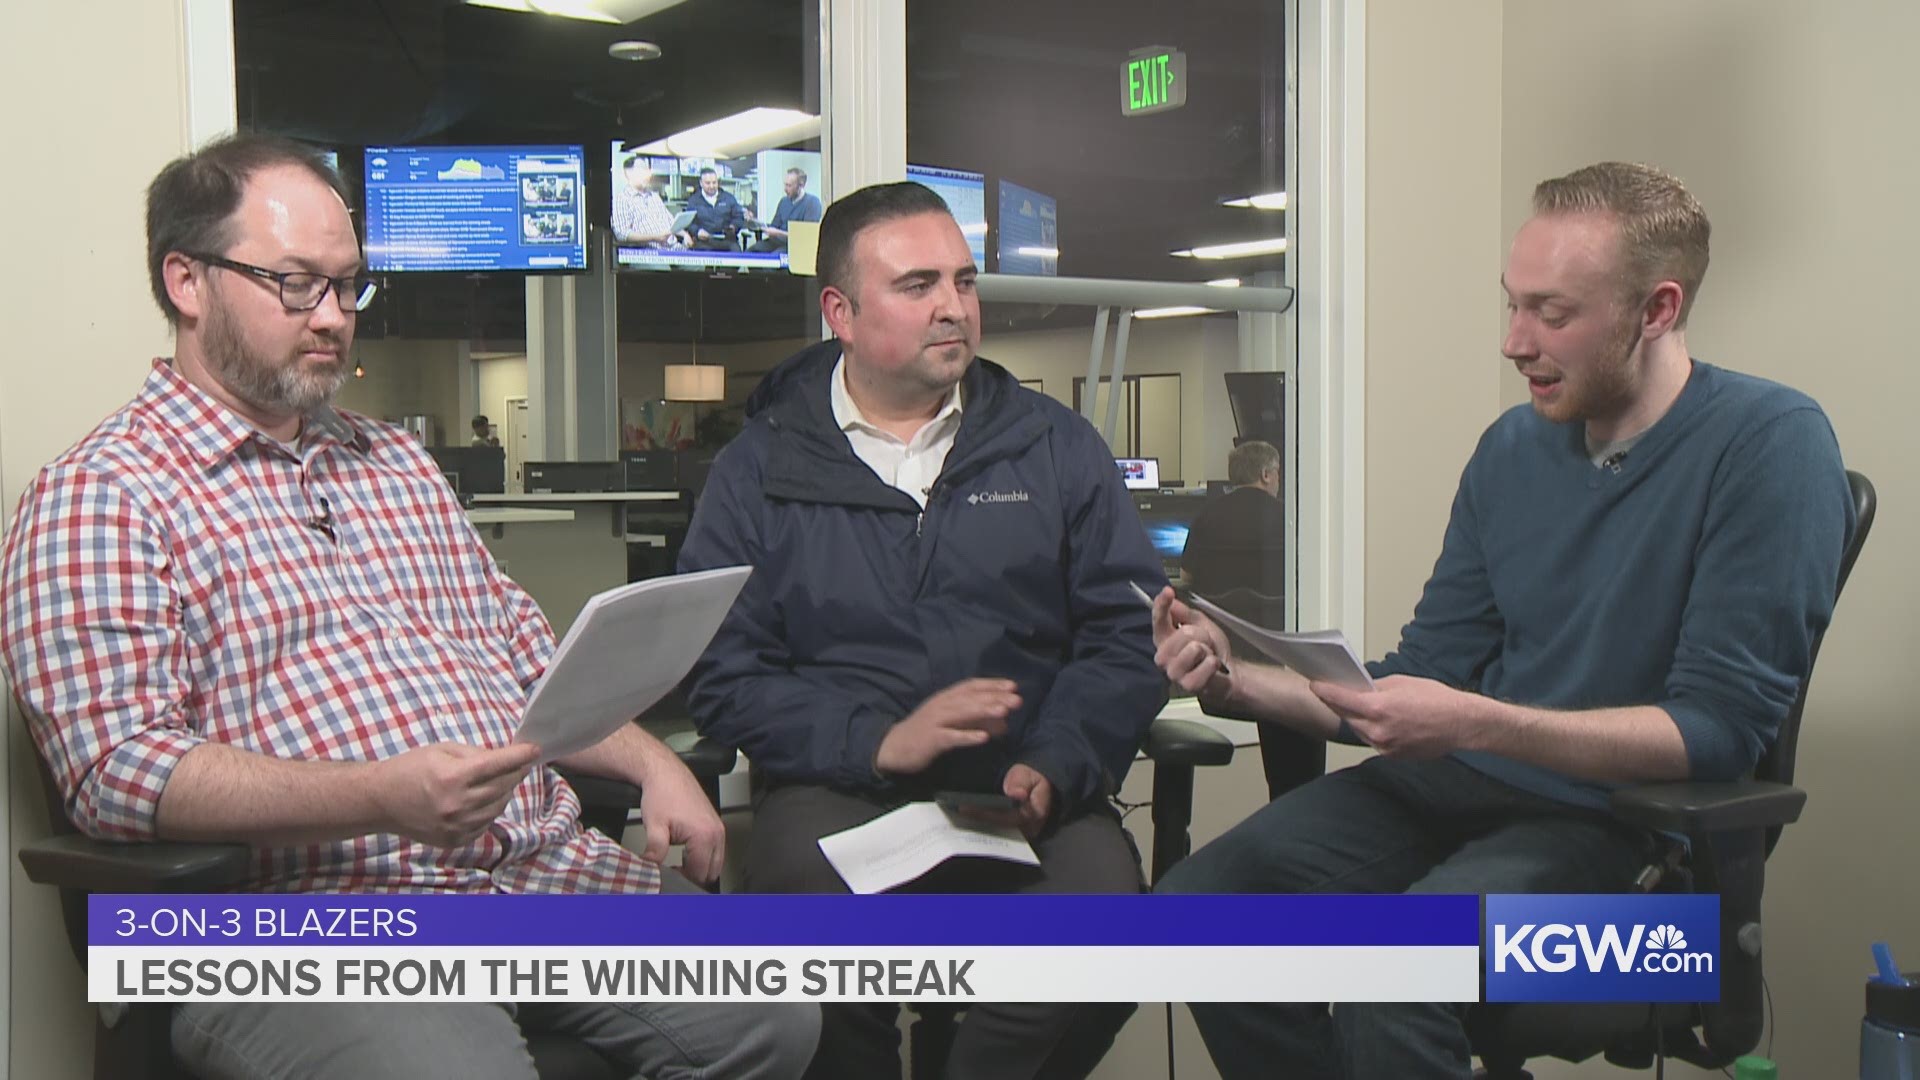 Three big games for the Blazers coming up, with a home game Friday against Boston and then two road games, Sunday against the Thunder and Tuesday at the Pelicans. KGW's Jared Cowley, Orlando Sanchez and Nate Hanson make their picks.